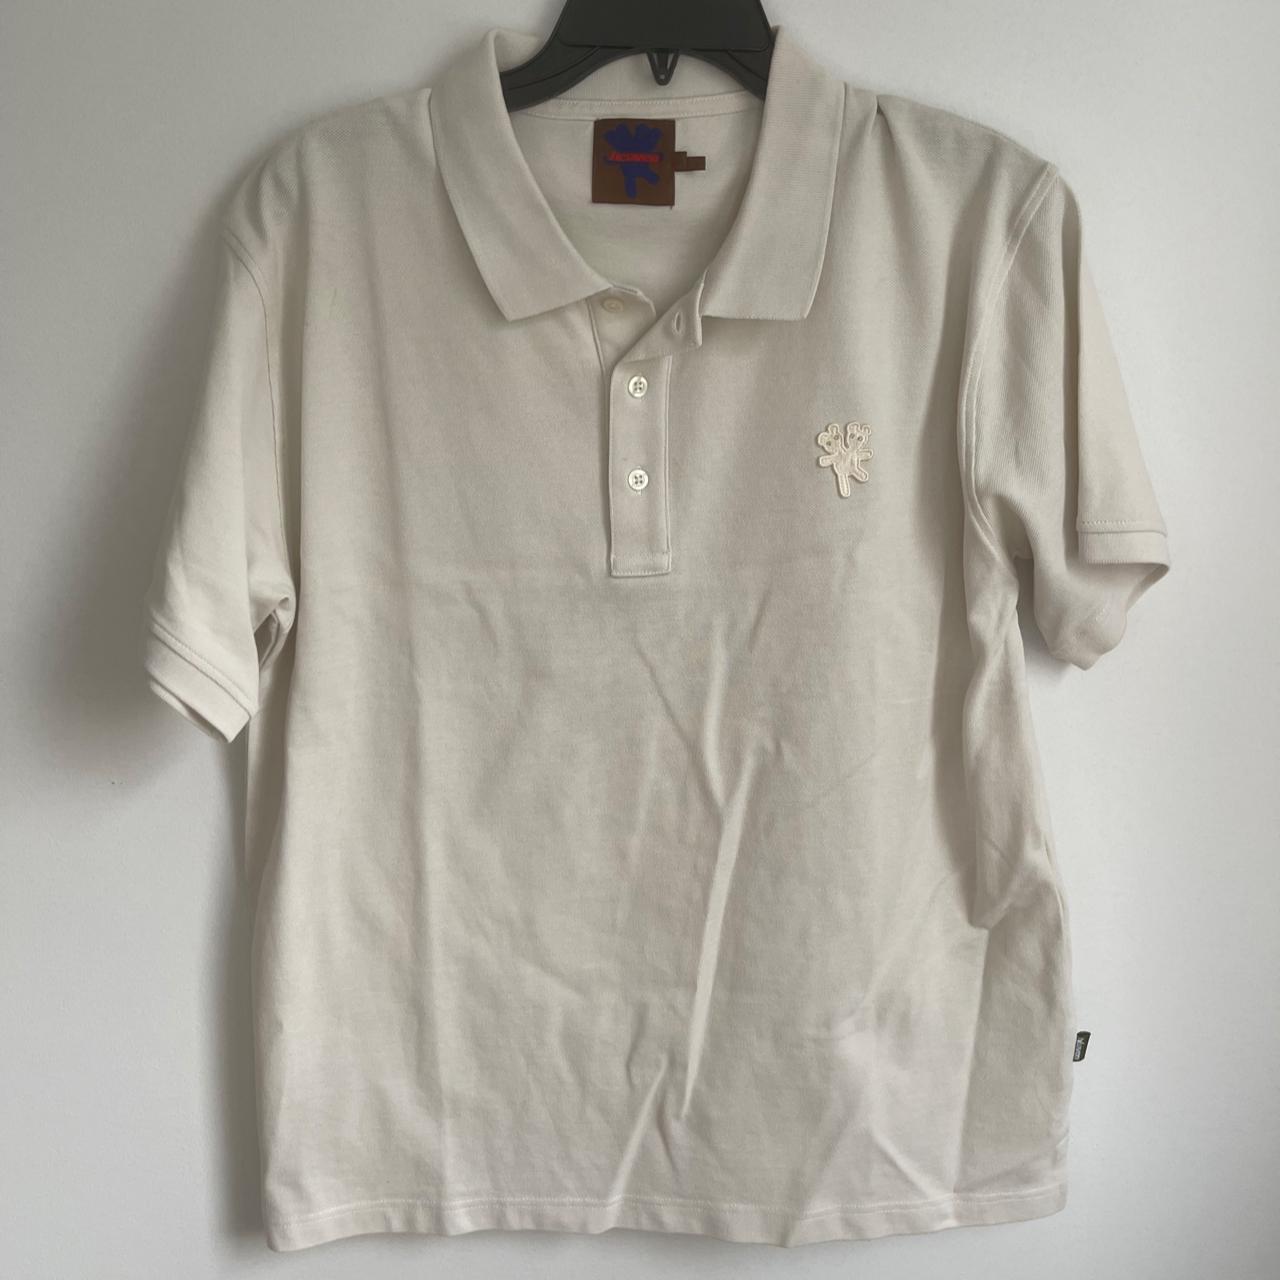 Heaven by Marc Jacobs polo in off white, never worn - Depop